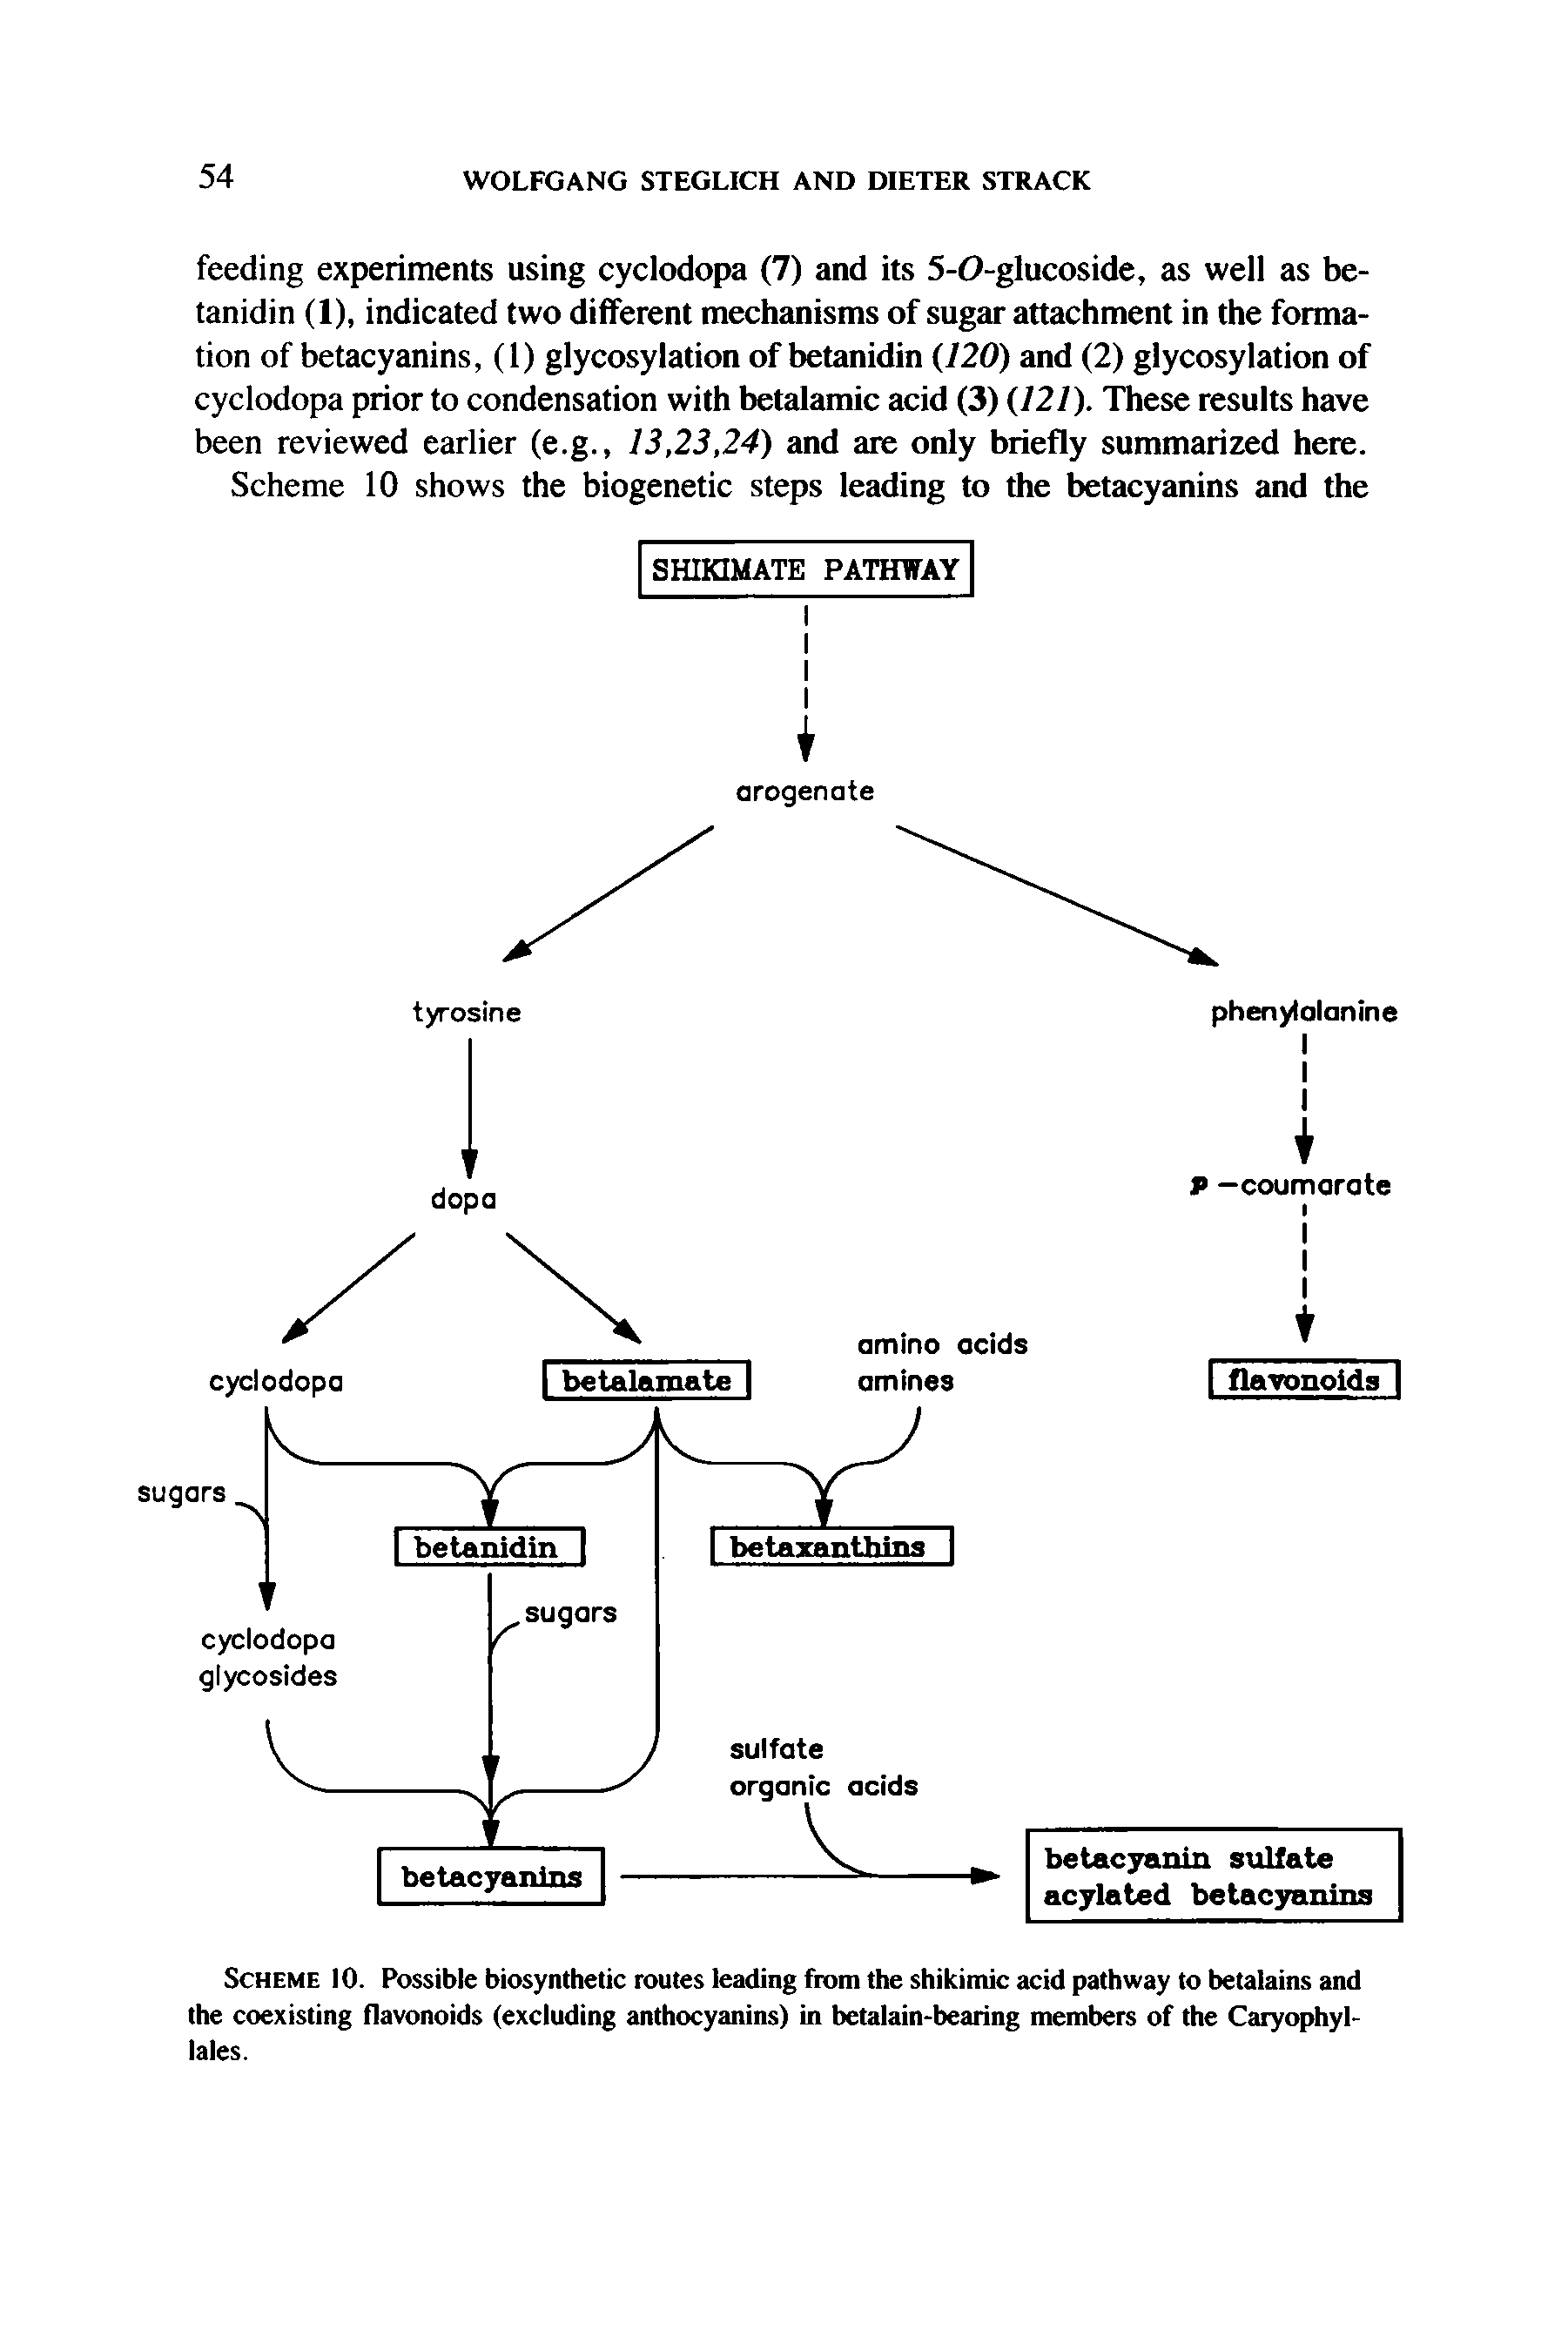 Scheme 10. Possible biosynthetic routes leading from the shikimic acid pathway to betalains and the coexisting flavonoids (excluding anthocyanins) in betalain-bearing members of the Caryophyl-lales.